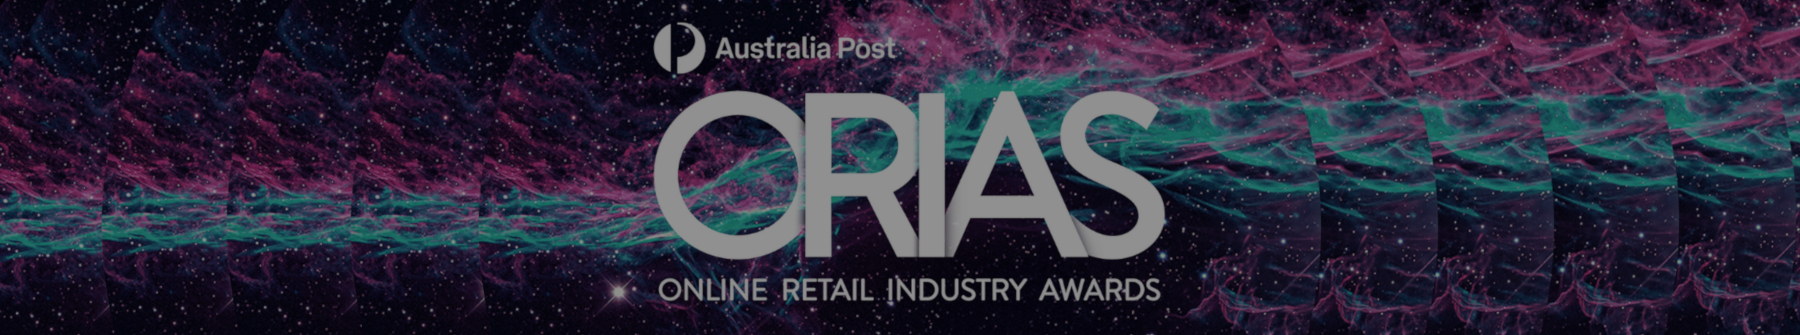 ICCONS takes out Best B2B Online Retailer in the Australia Post Online Retail Industry Awards (ORIAS)